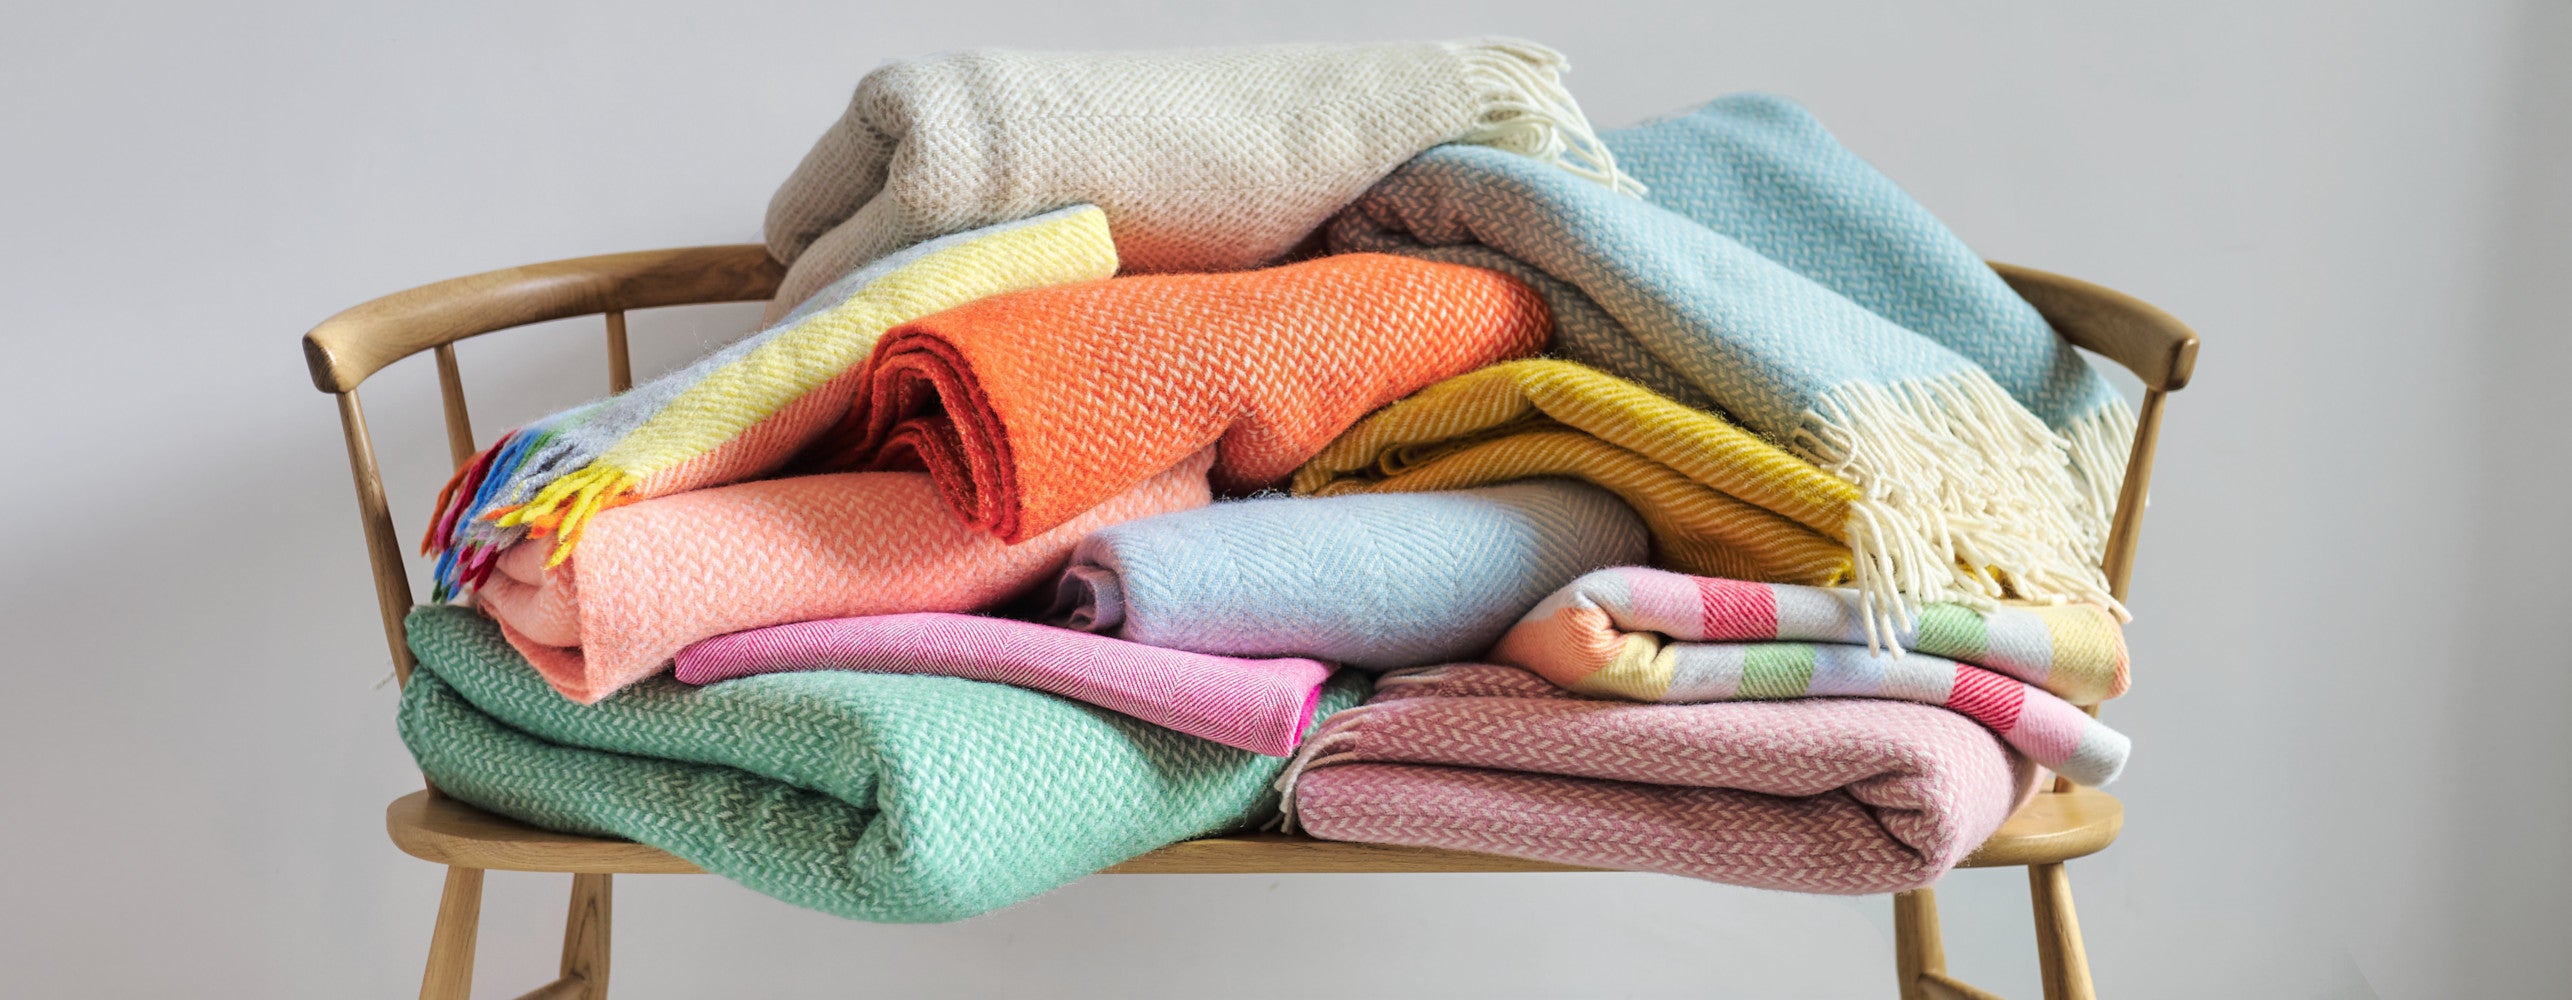 The British Blanket Company wool blankets in a stack on a wooden bench